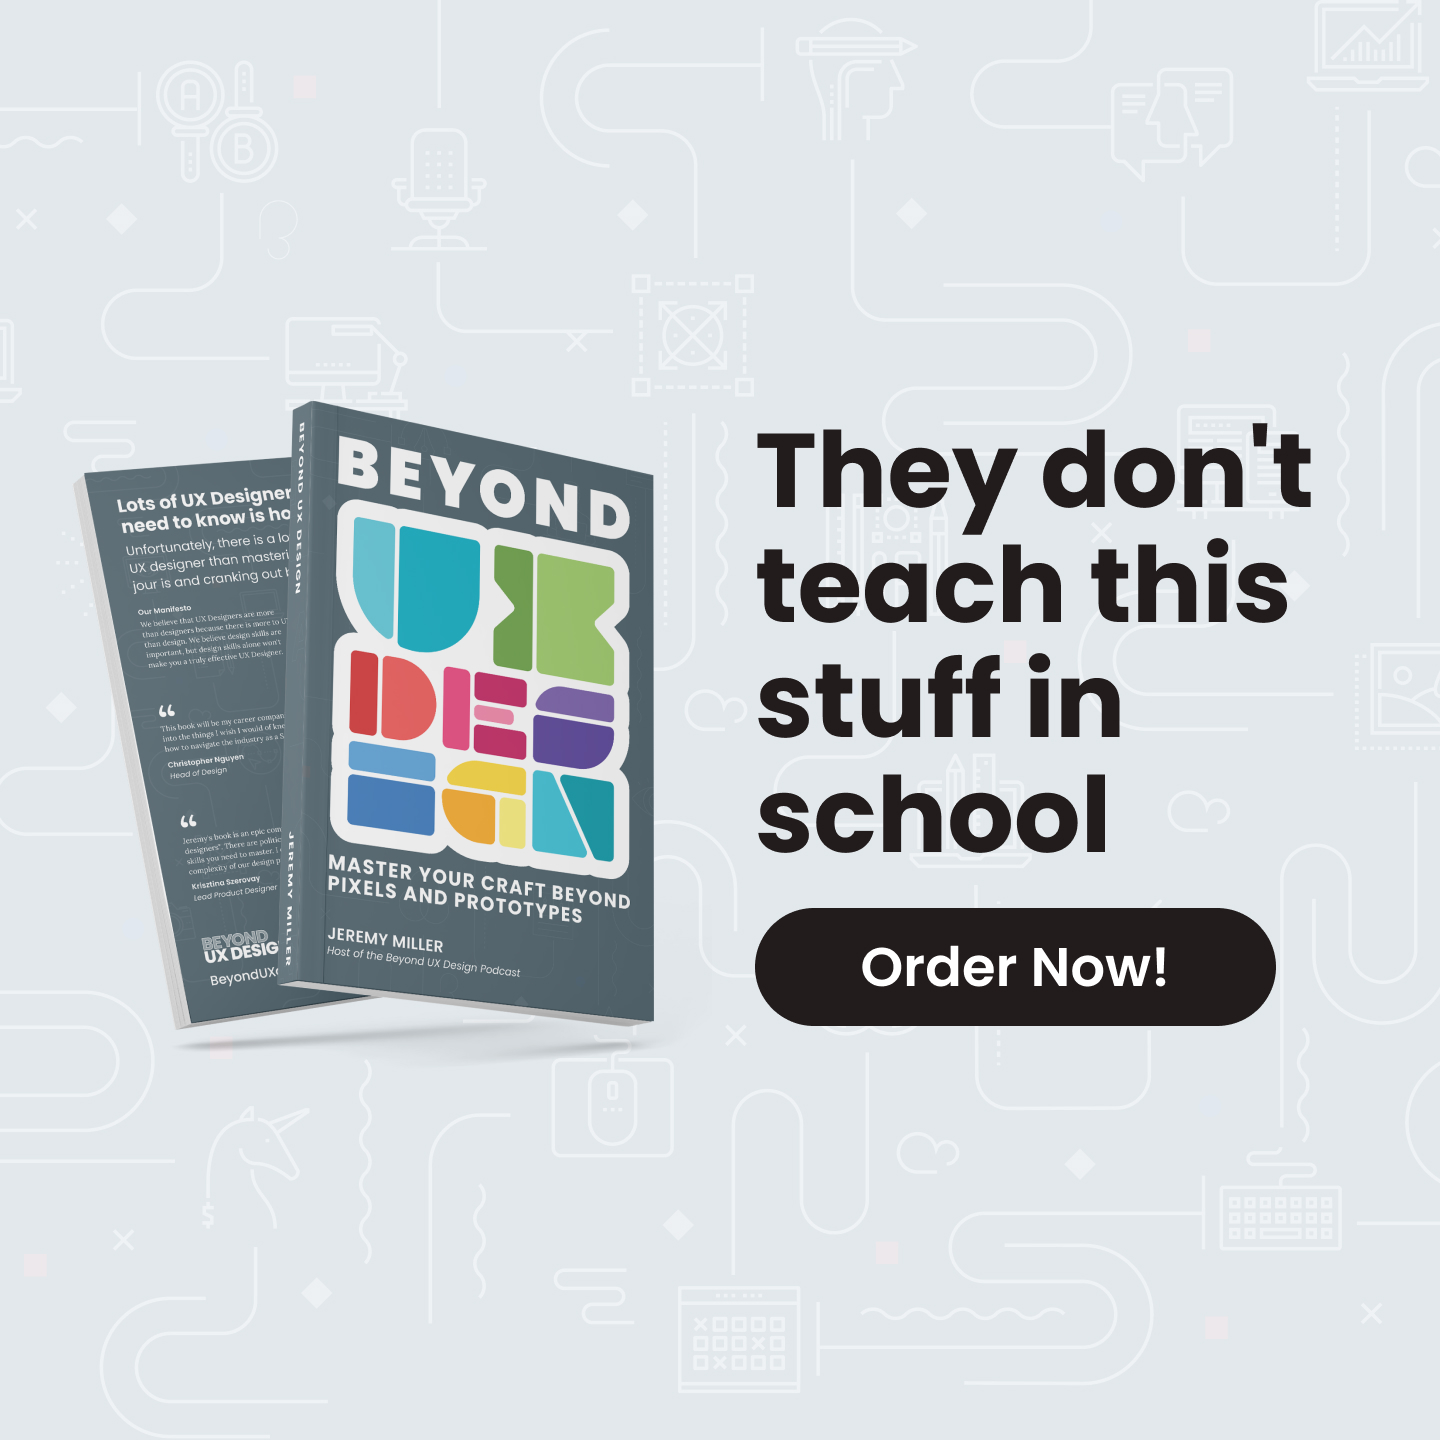 Beyond UX Design: Master Your Craft Beyond Pixels and Prototypes is OUT NOW!